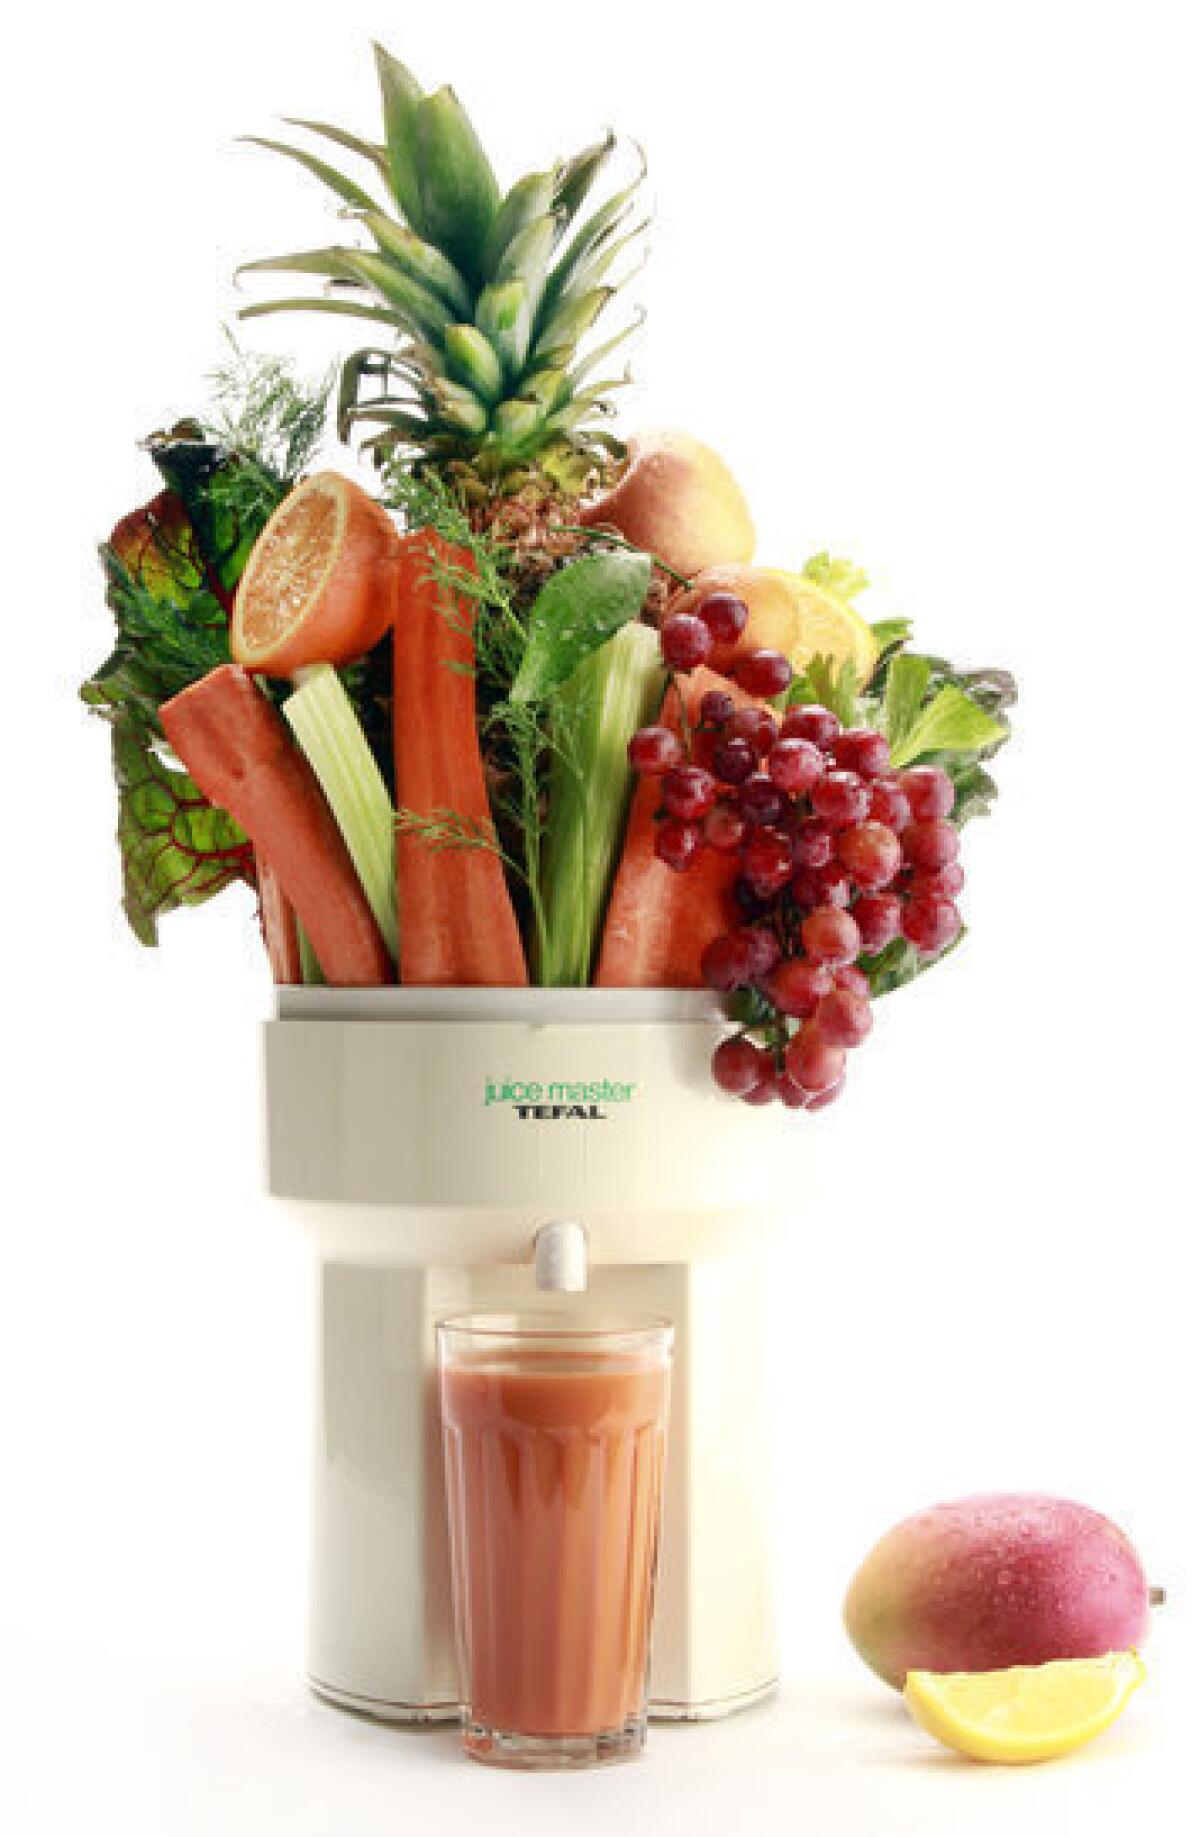 Juices can pack power, but pick ingredients carefully to keep calories in check.